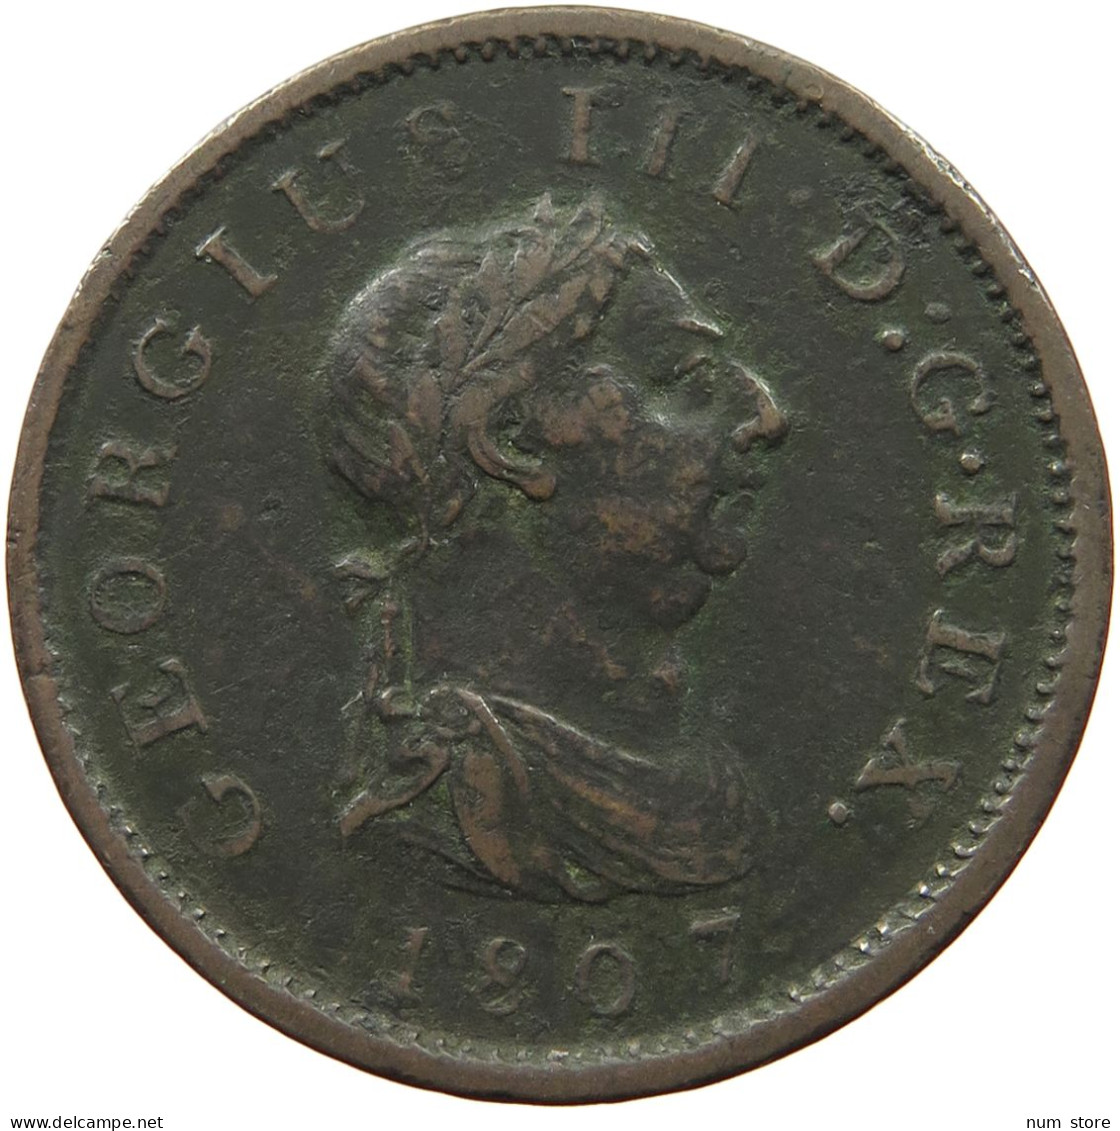 GREAT BRITAIN PENNY 1807 GEORGE III. 1760-1820 #MA 001560 - C. 1 Penny